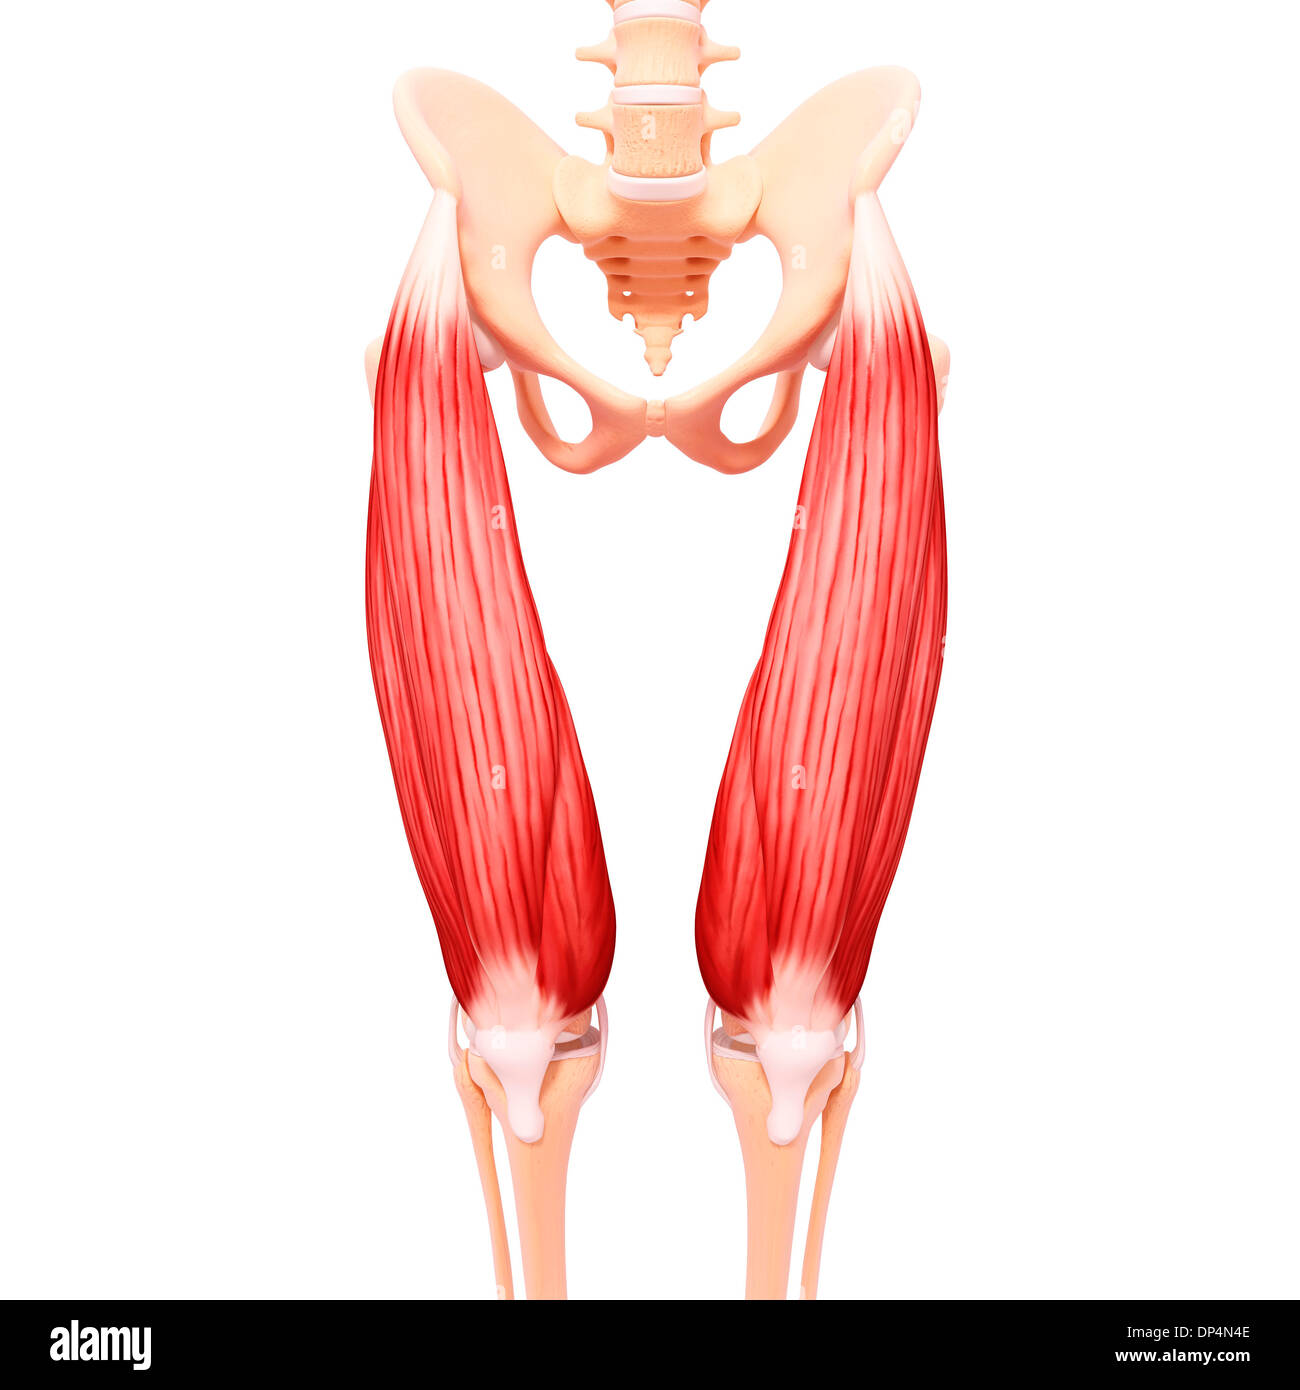 Muscles of the upper leg, illustration Stock Photo - Alamy